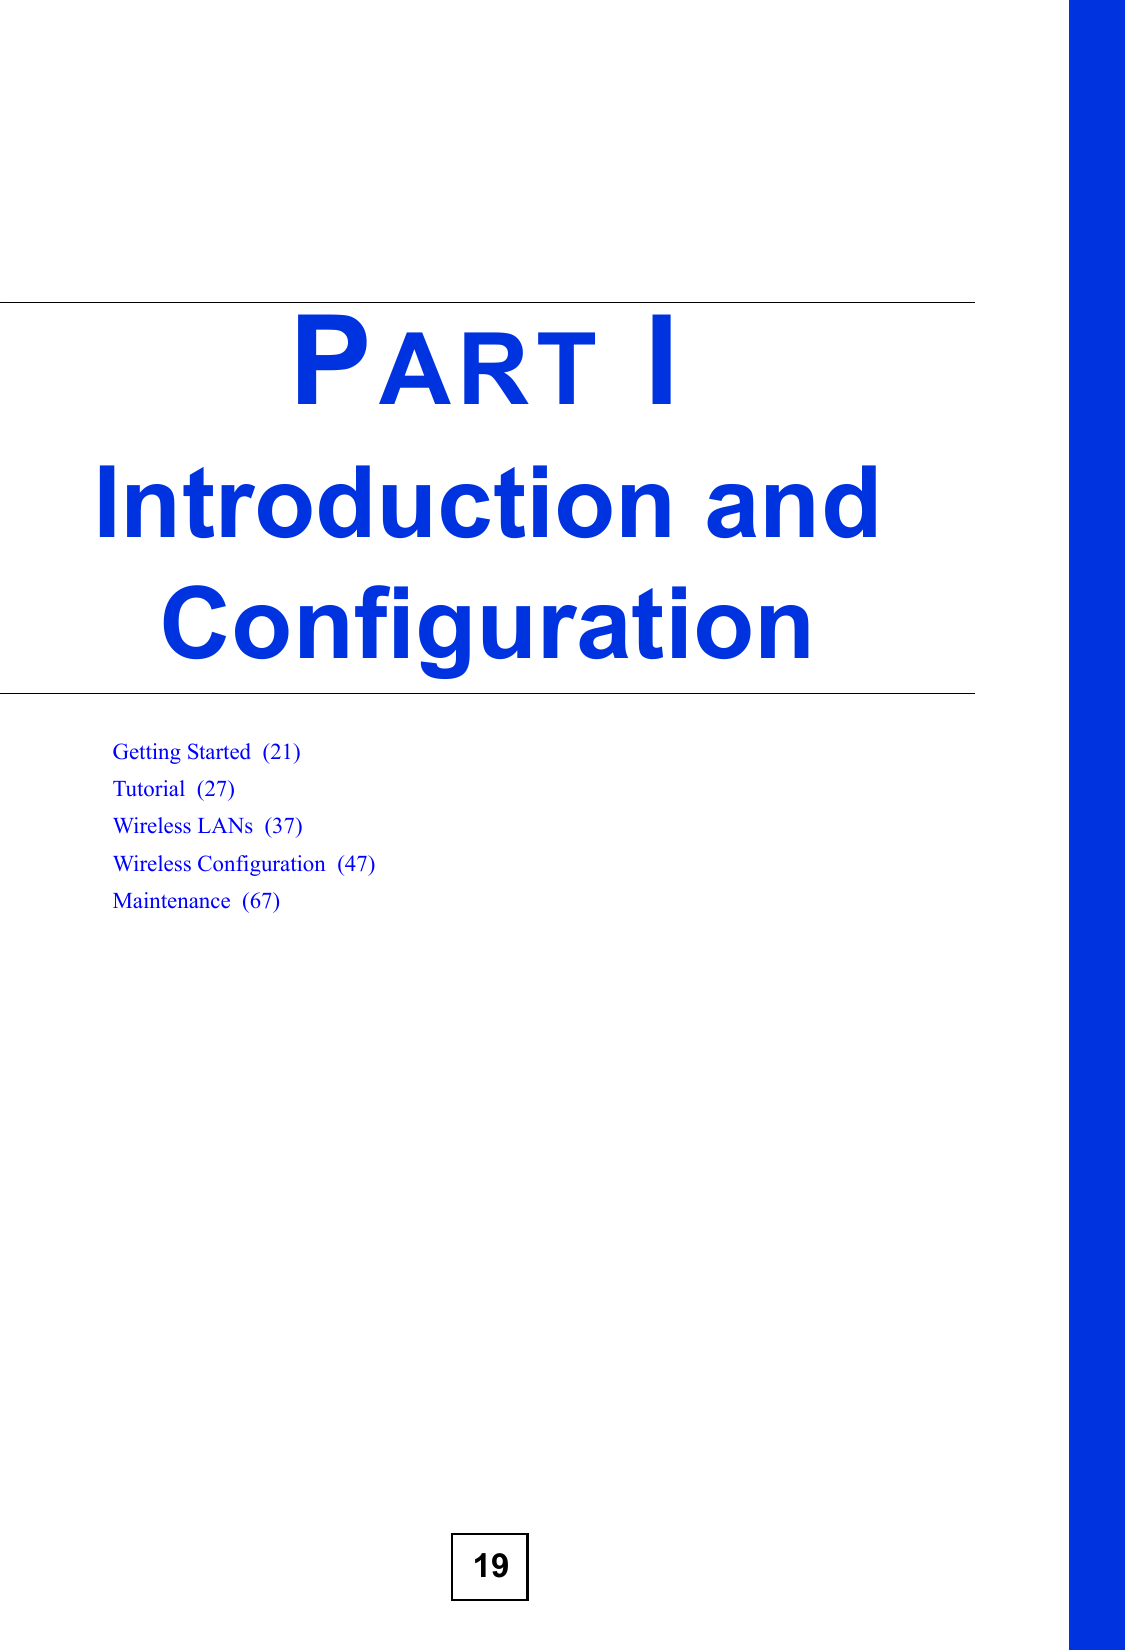 19PART IIntroduction and ConfigurationGetting Started  (21)Tutorial  (27)Wireless LANs  (37)Wireless Configuration  (47)Maintenance  (67)